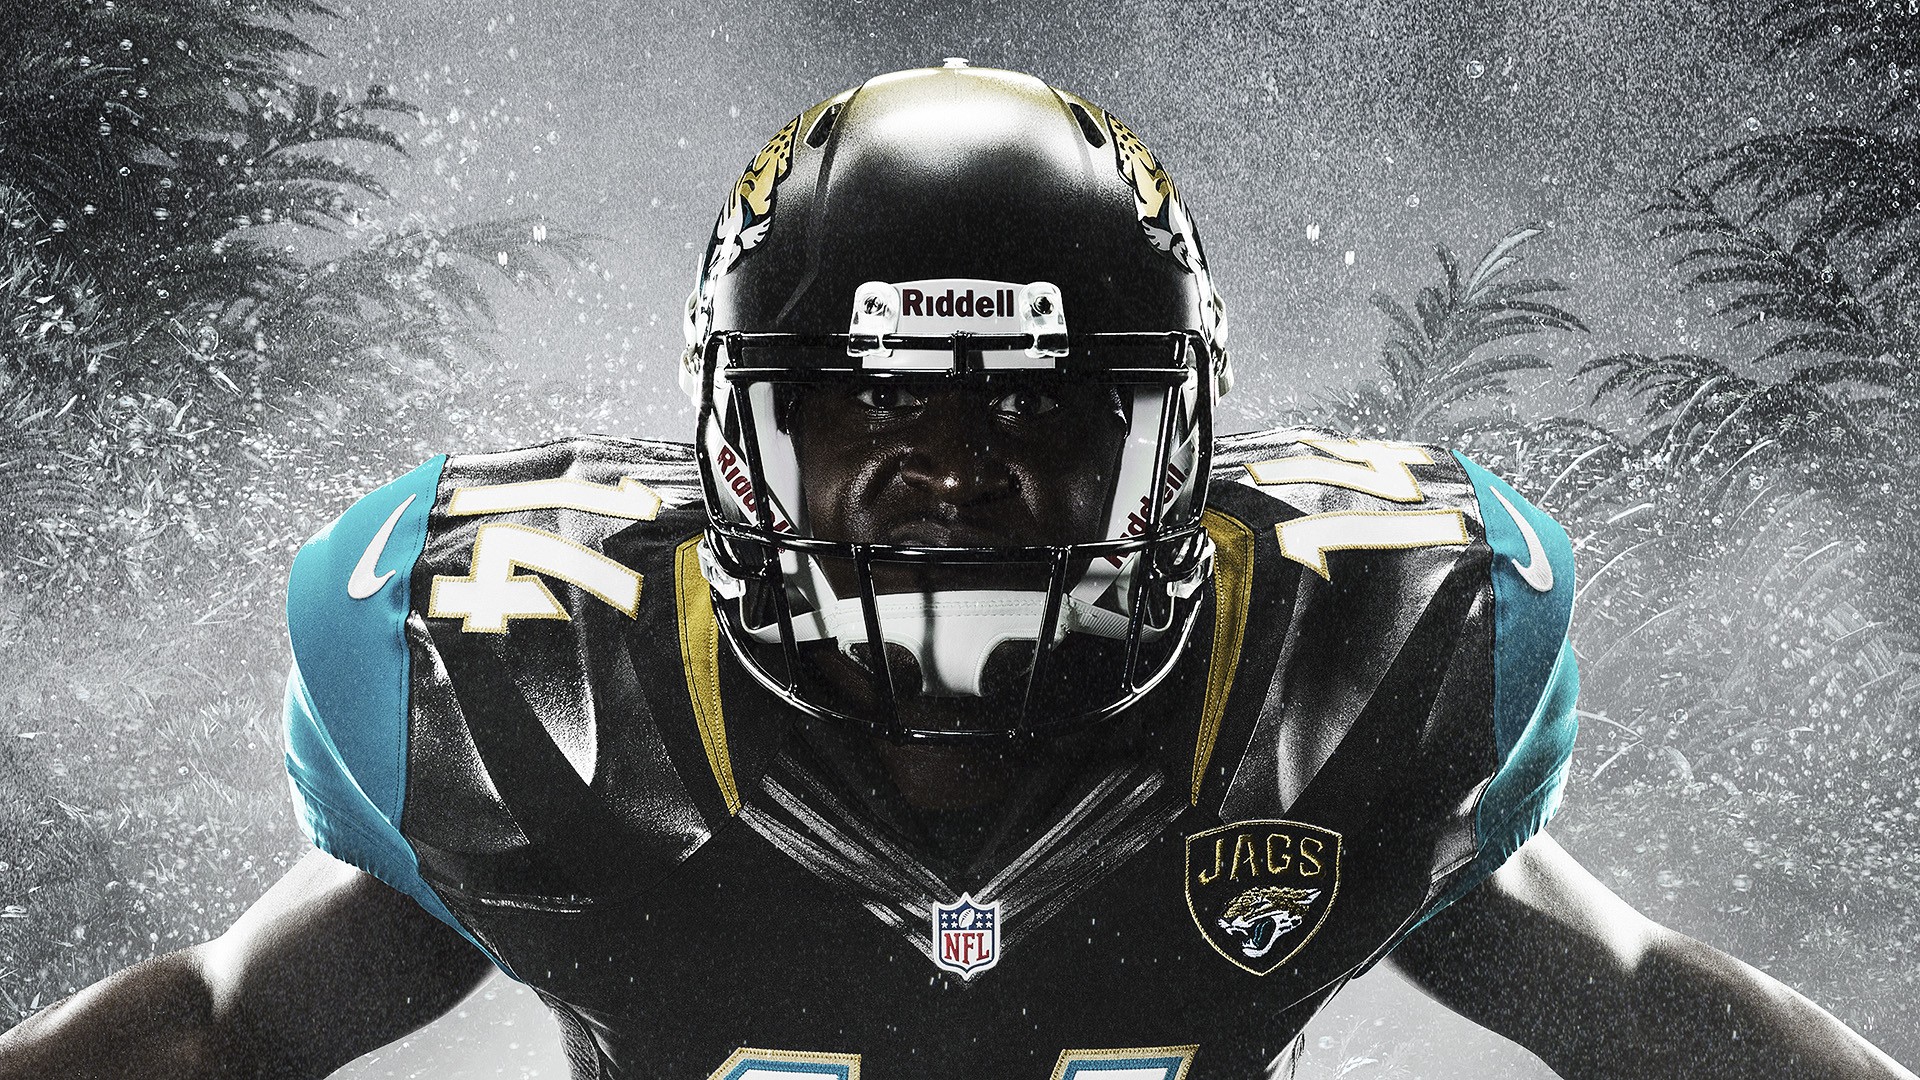 HD Desktop Wallpaper Jacksonville Jaguars NFL with high-resolution 1920x1080 pixel. You can use this wallpaper for your Mac or Windows Desktop Background, iPhone, Android or Tablet and another Smartphone device